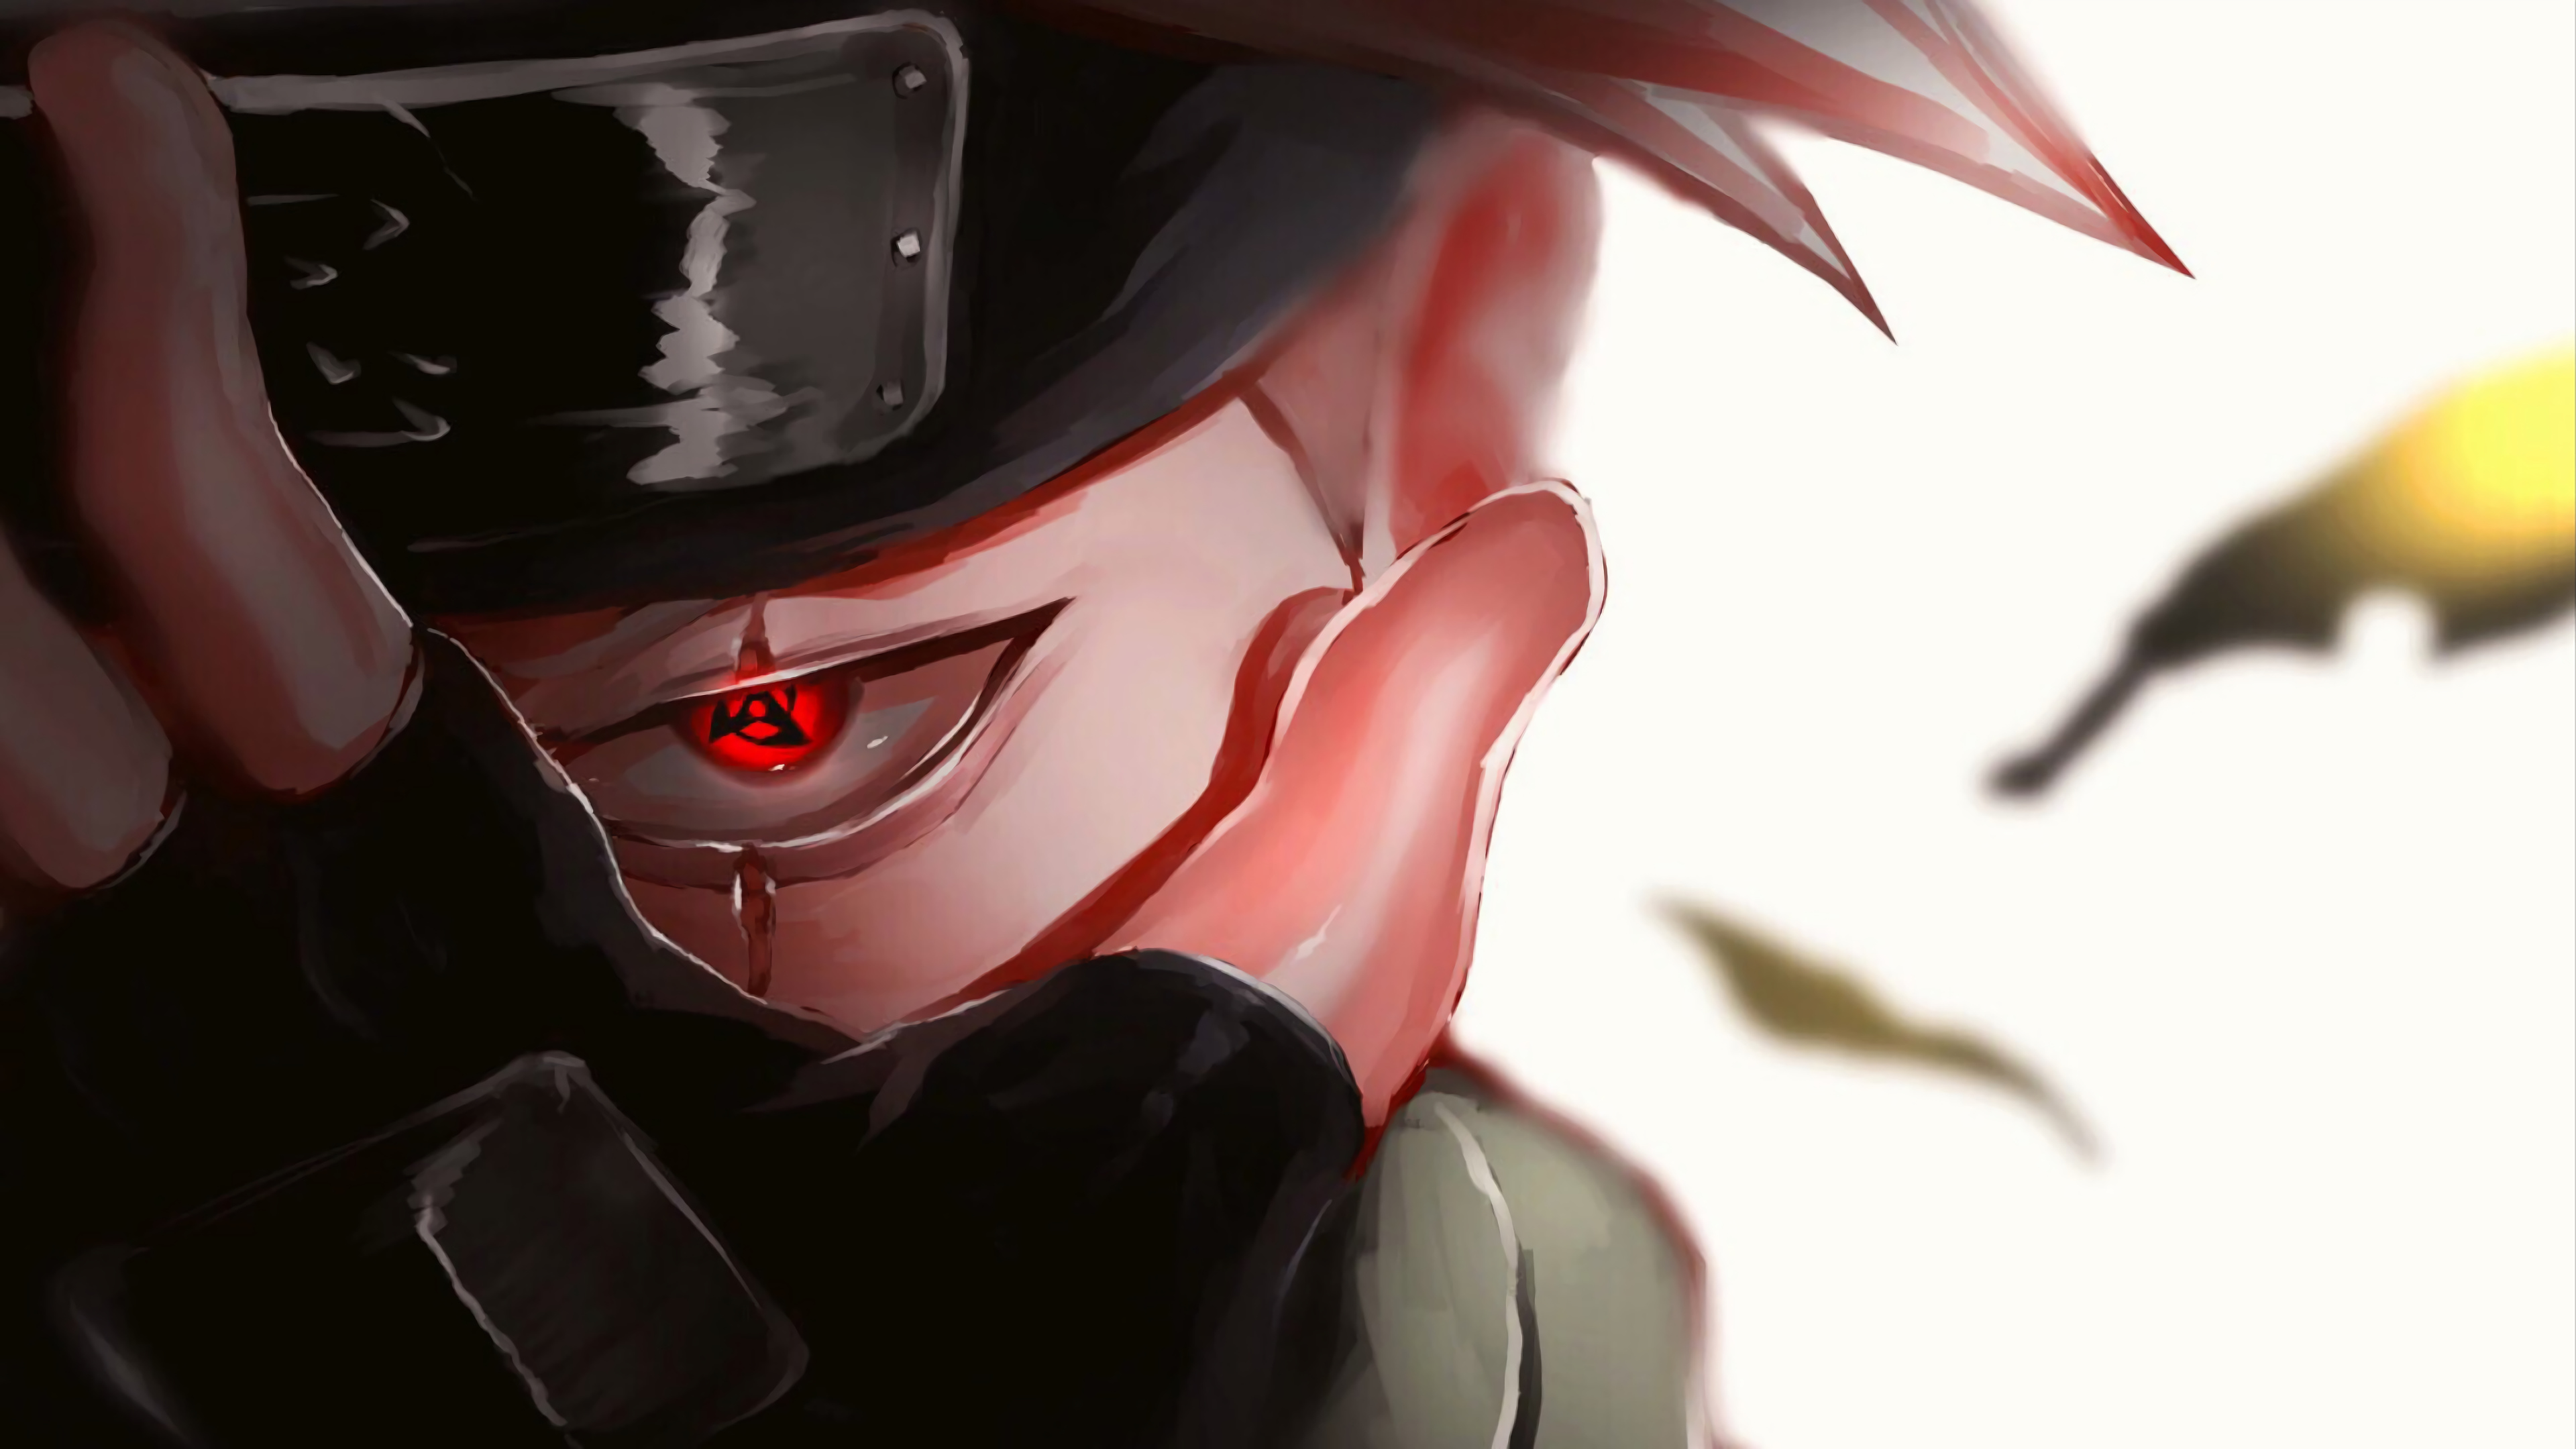 Featured image of post Kakashi E Obito Wallpaper 4K Celular : Awesome wallpaper for desktop, pc, laptop, iphone, smartphone, android phone (samsung set as background wallpaper or just save it to your photo, image, picture gallery album collection.